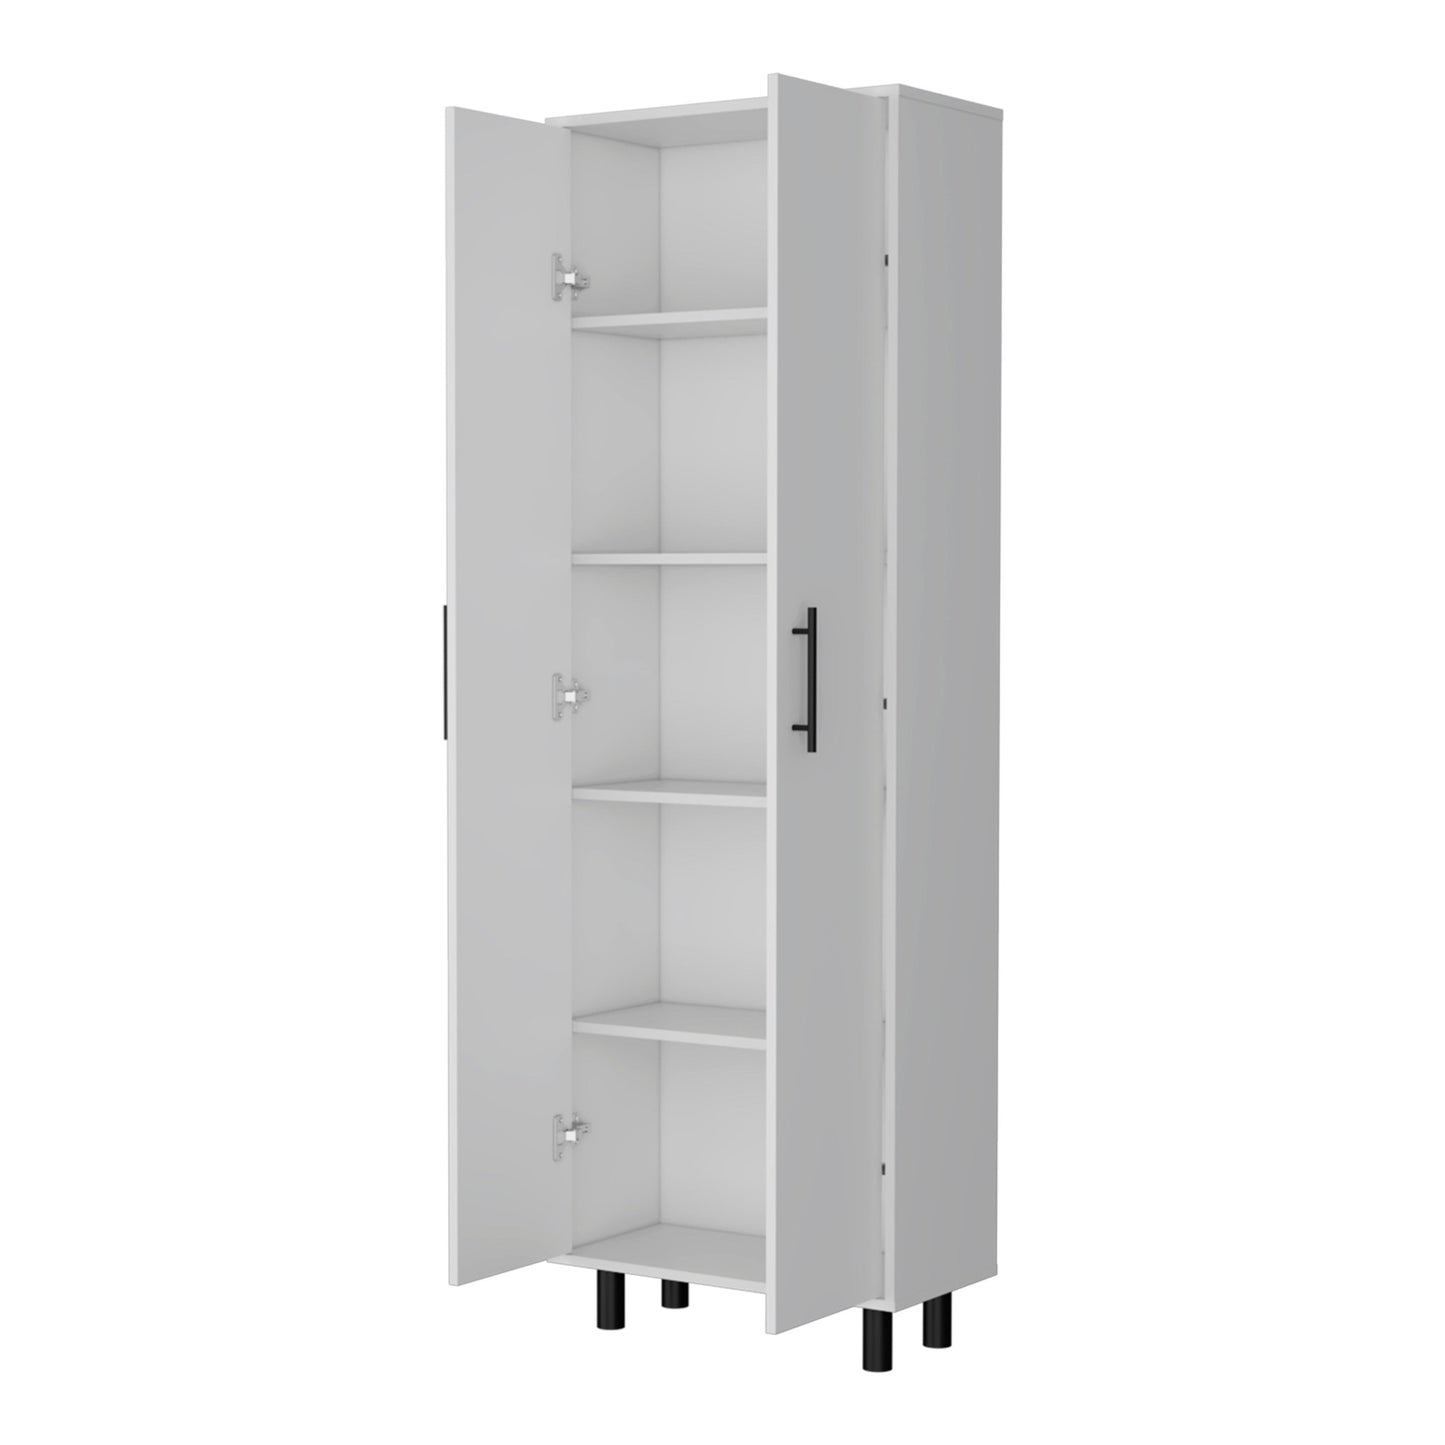 71" White Tall Pantry Cabinet